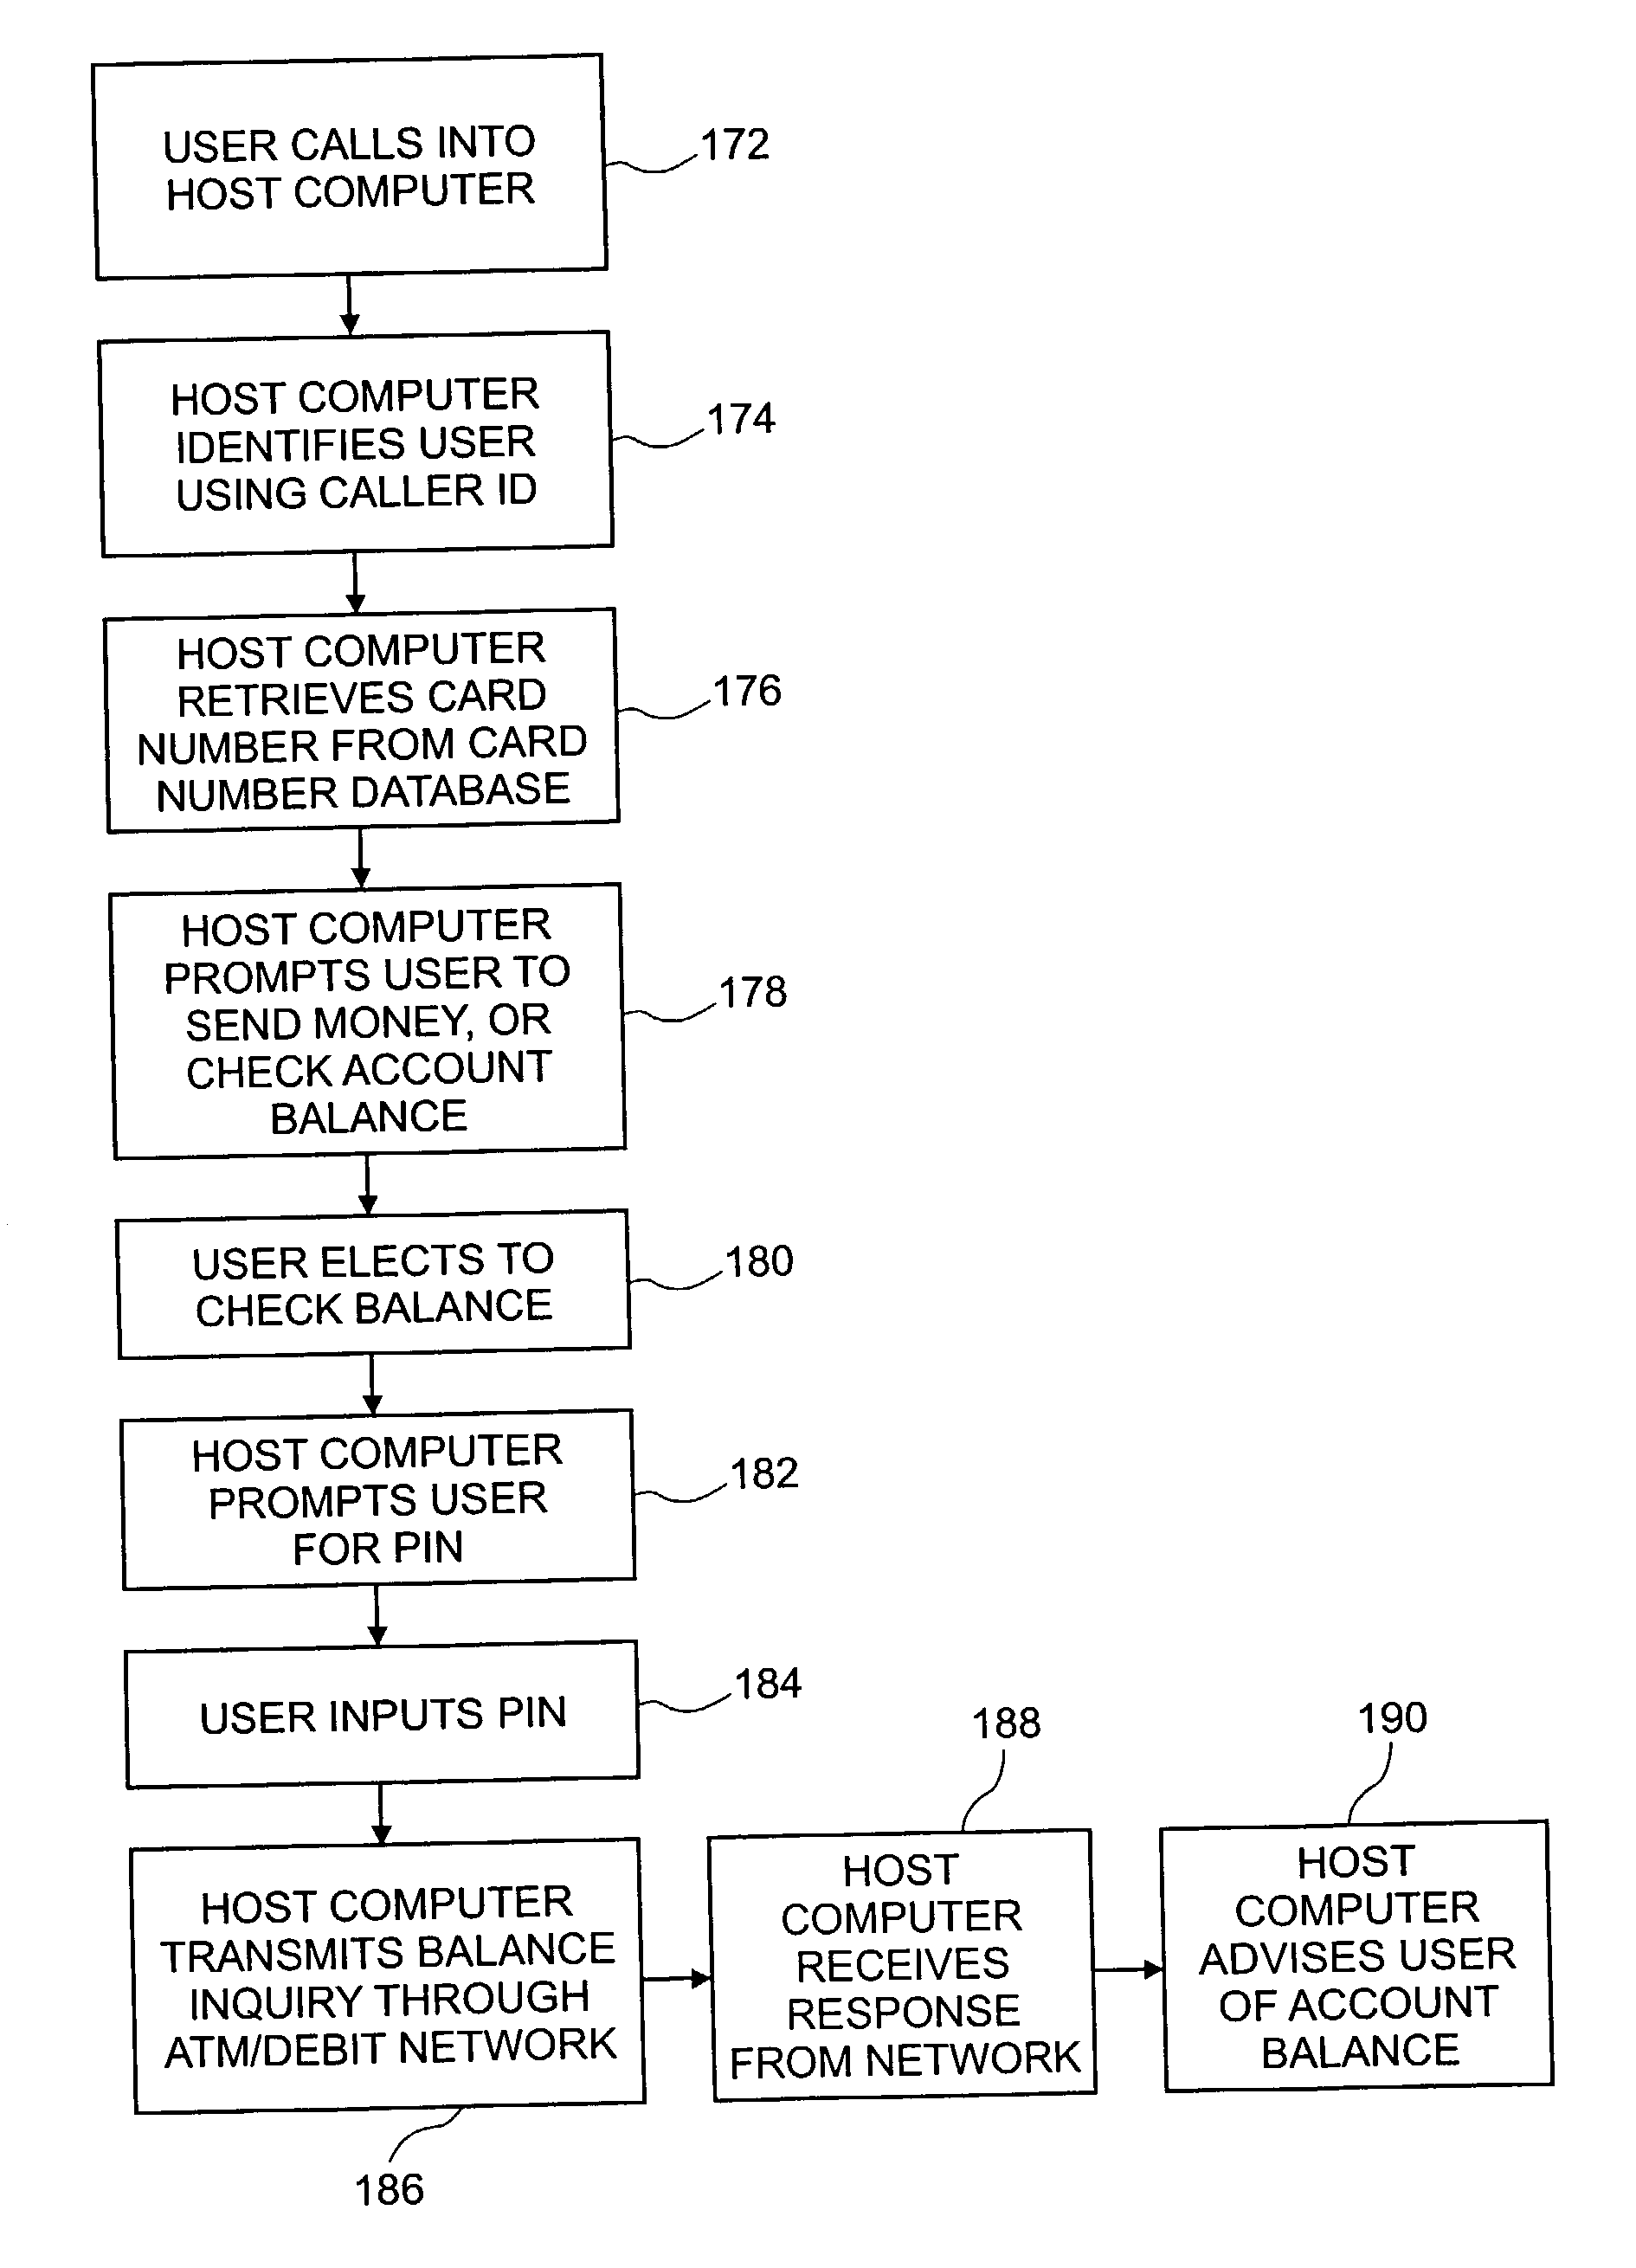 Systems and methods for fund transfers